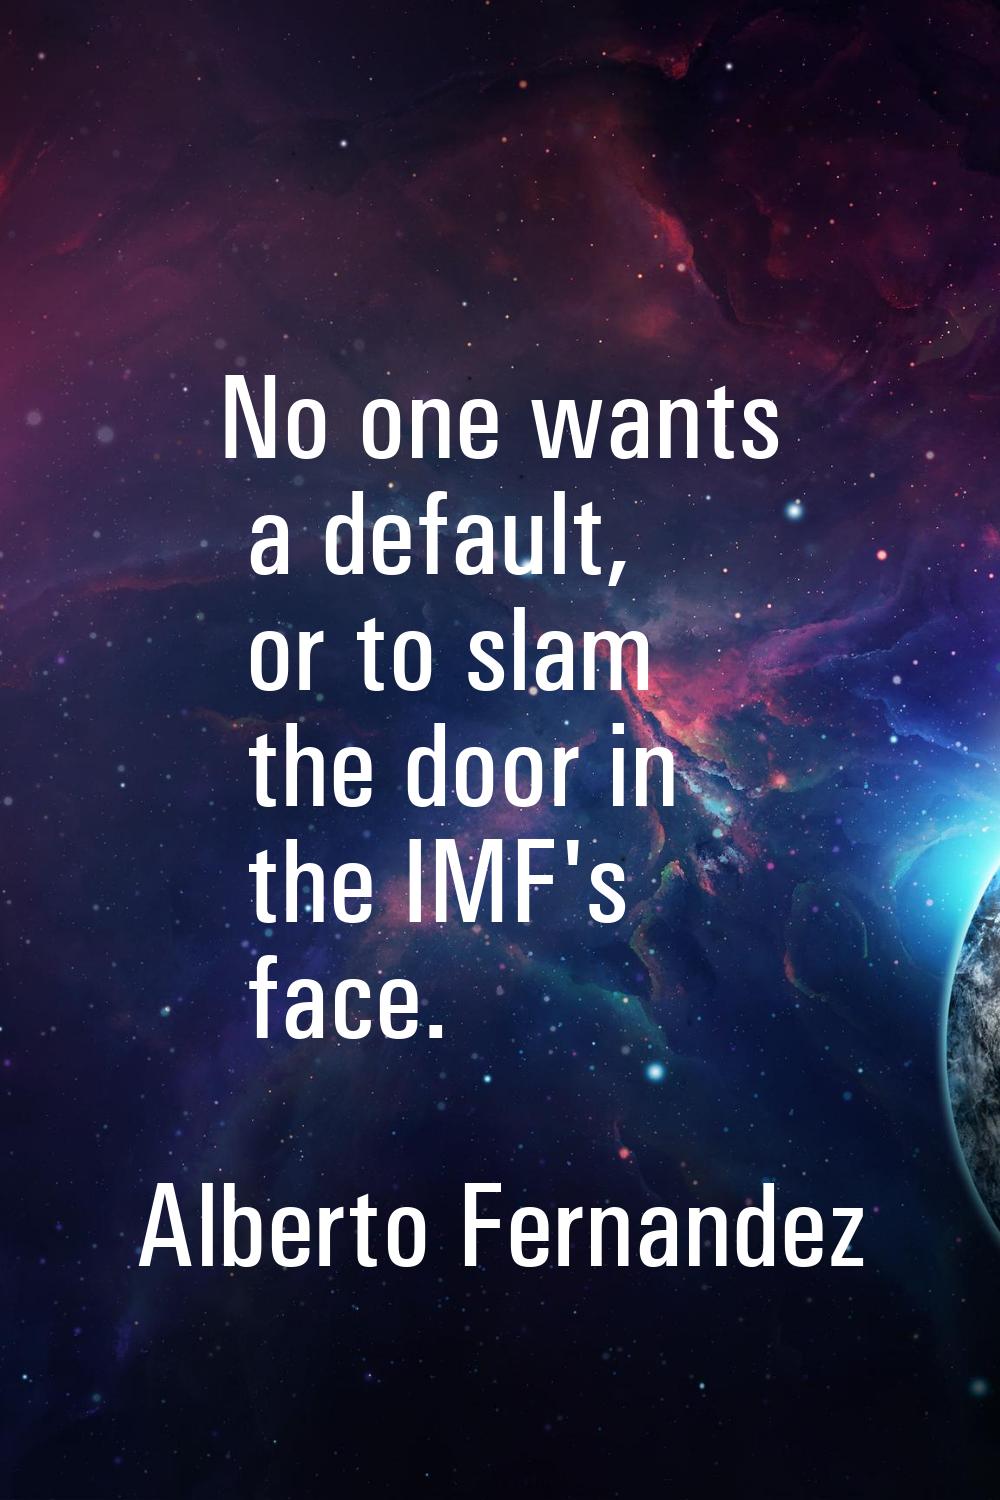 No one wants a default, or to slam the door in the IMF's face.